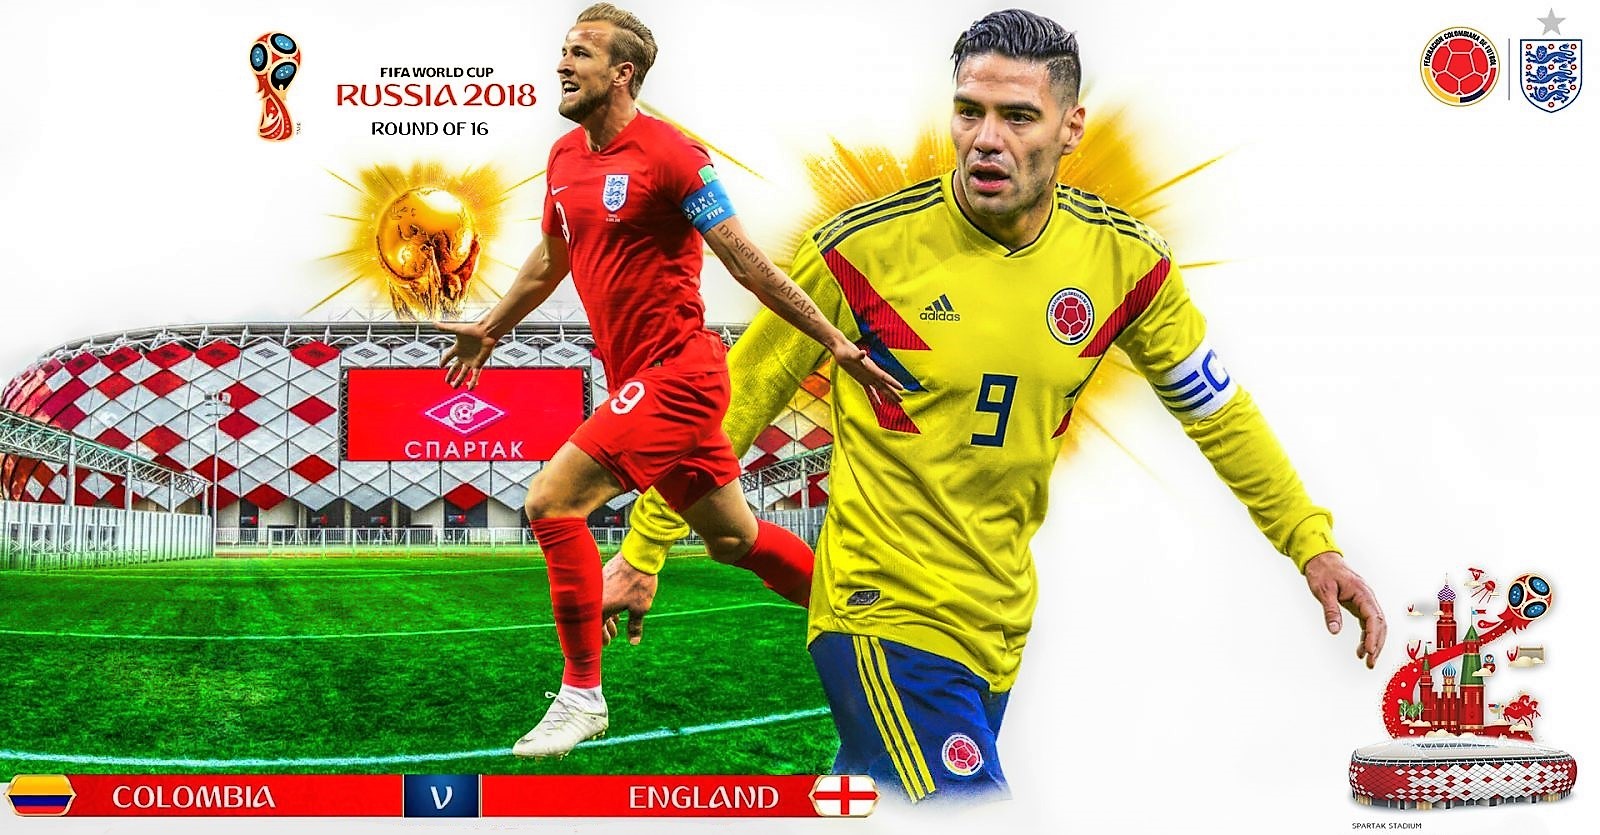 colombia_england_world_cup_2018-1600x900.jpg